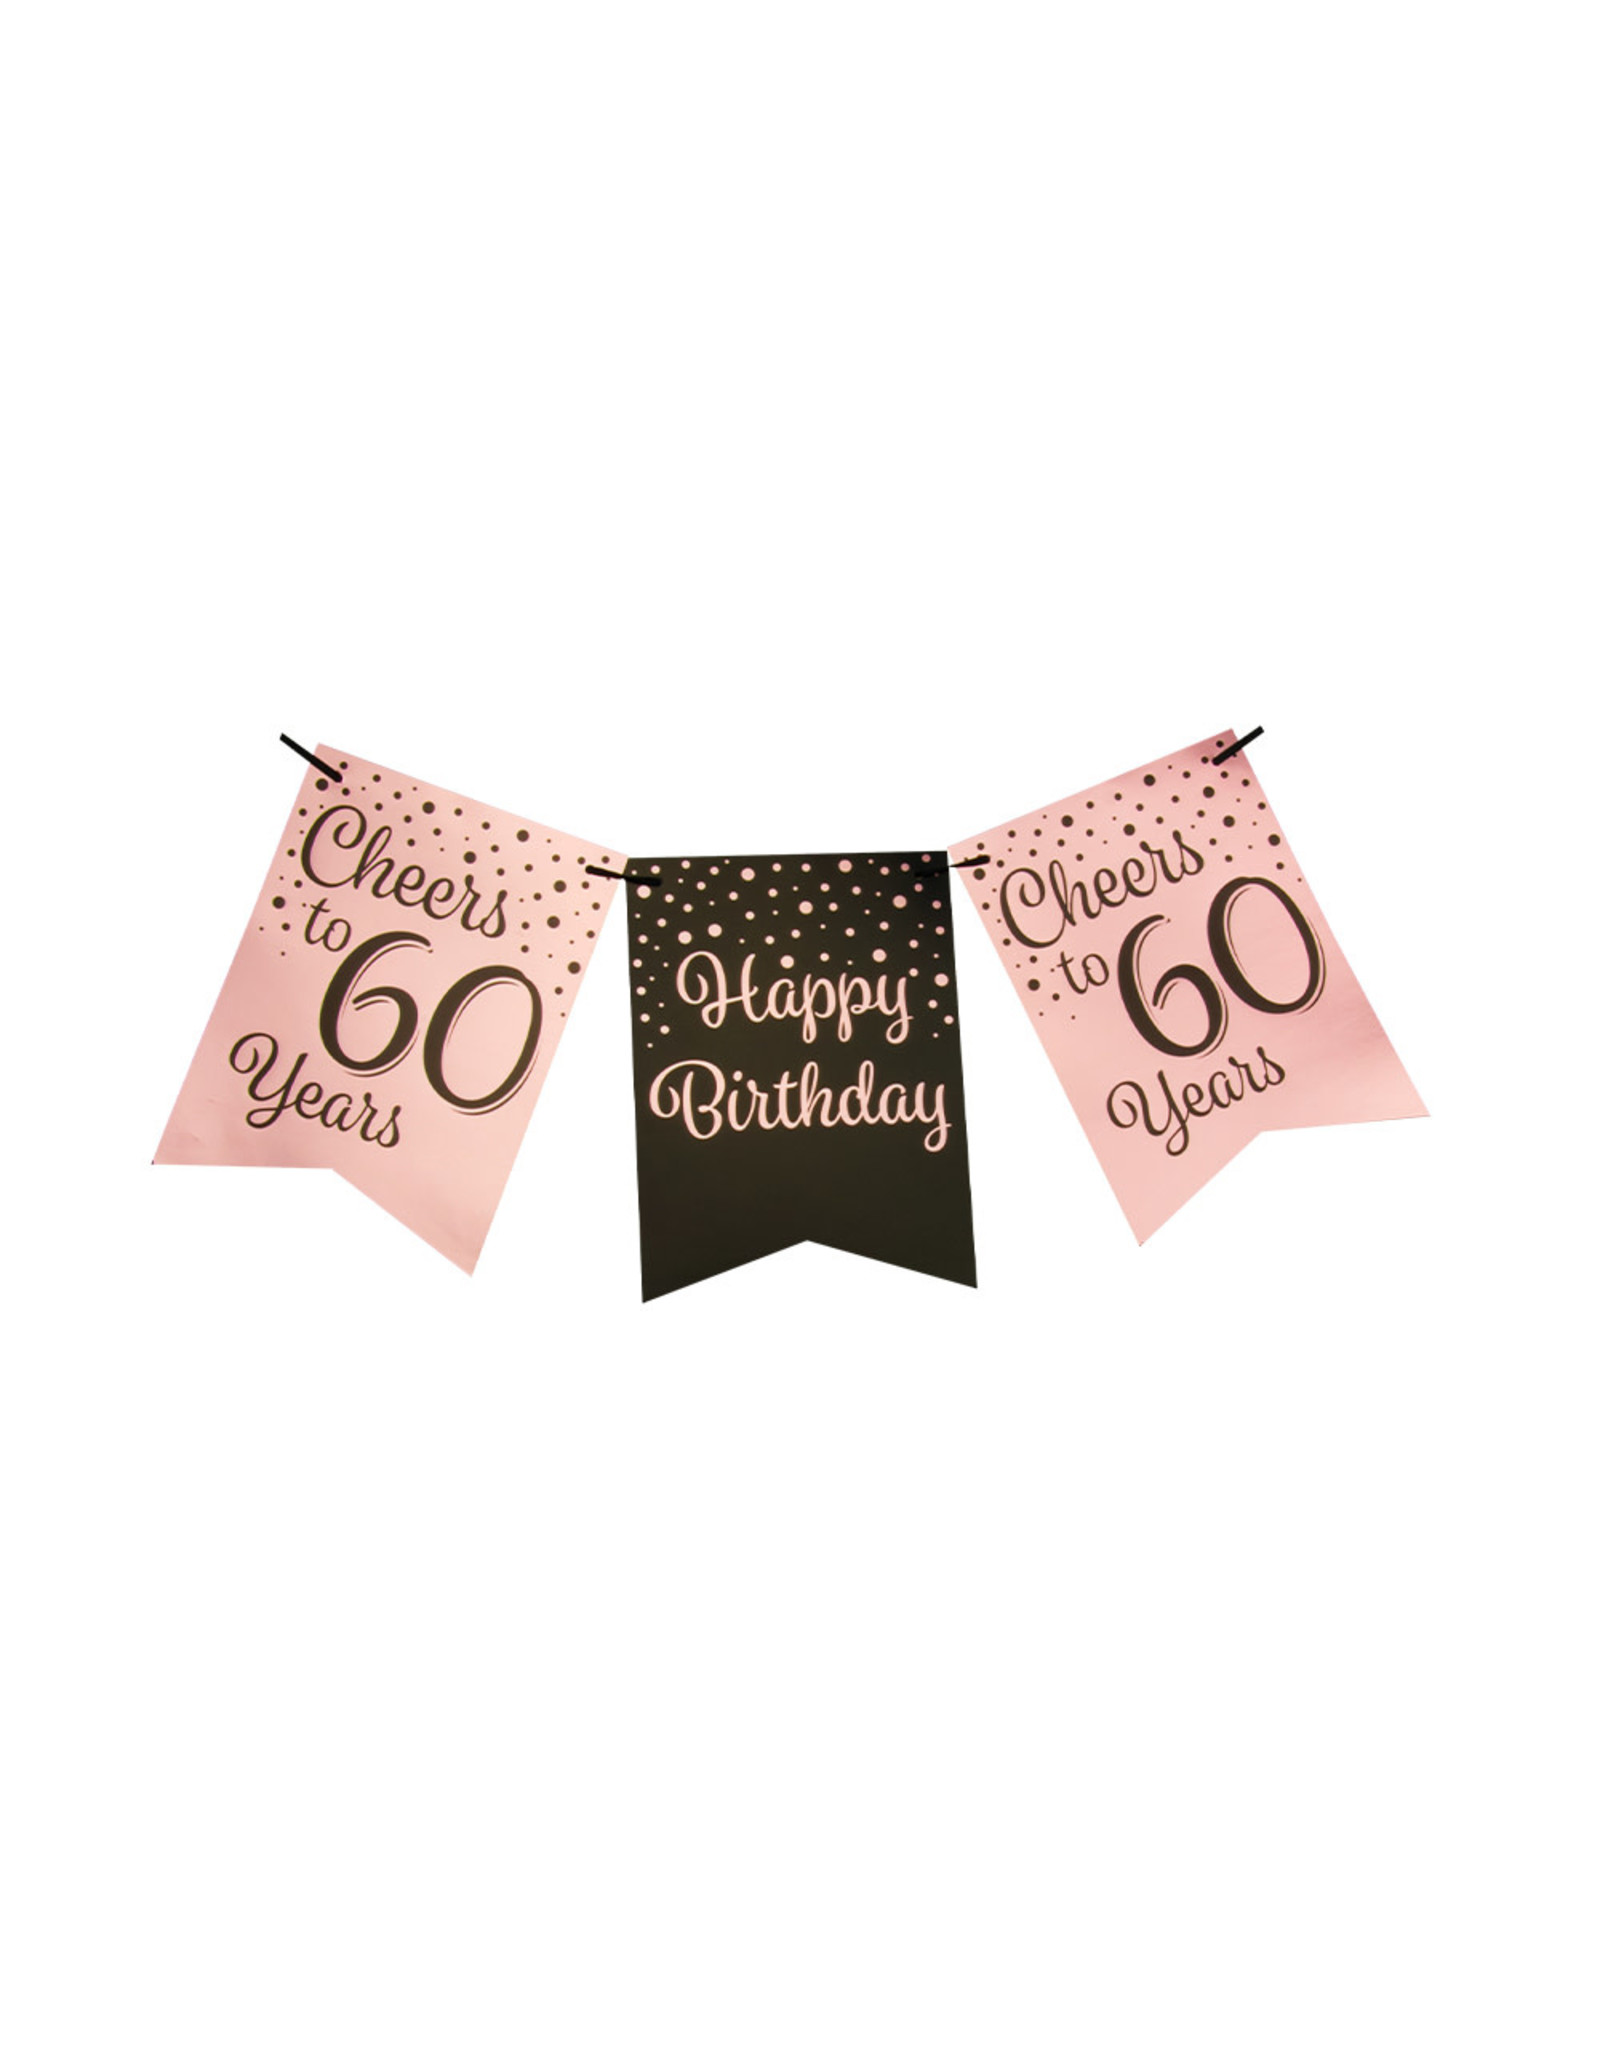 Party flag banner rose gold/black cheers to 60 years 6 meter